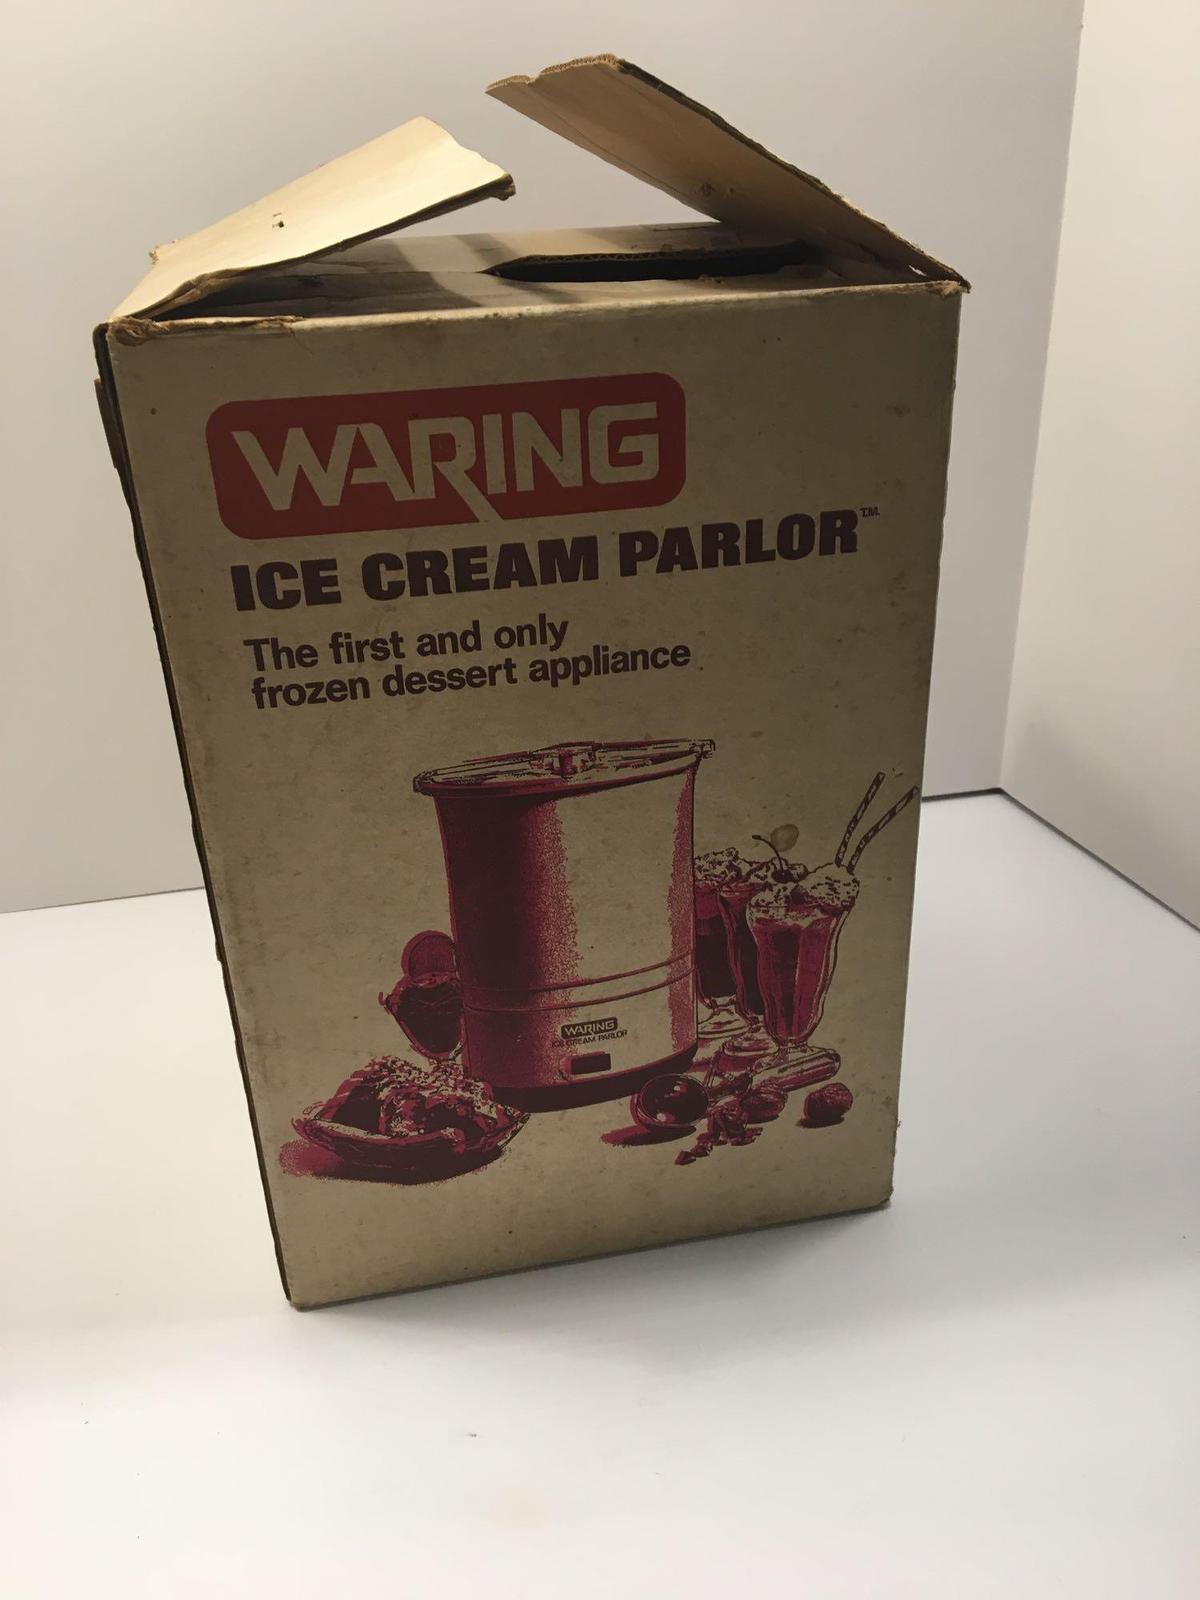 WARING ice cream parlor (model CF520-1;white; operational condition unknown)